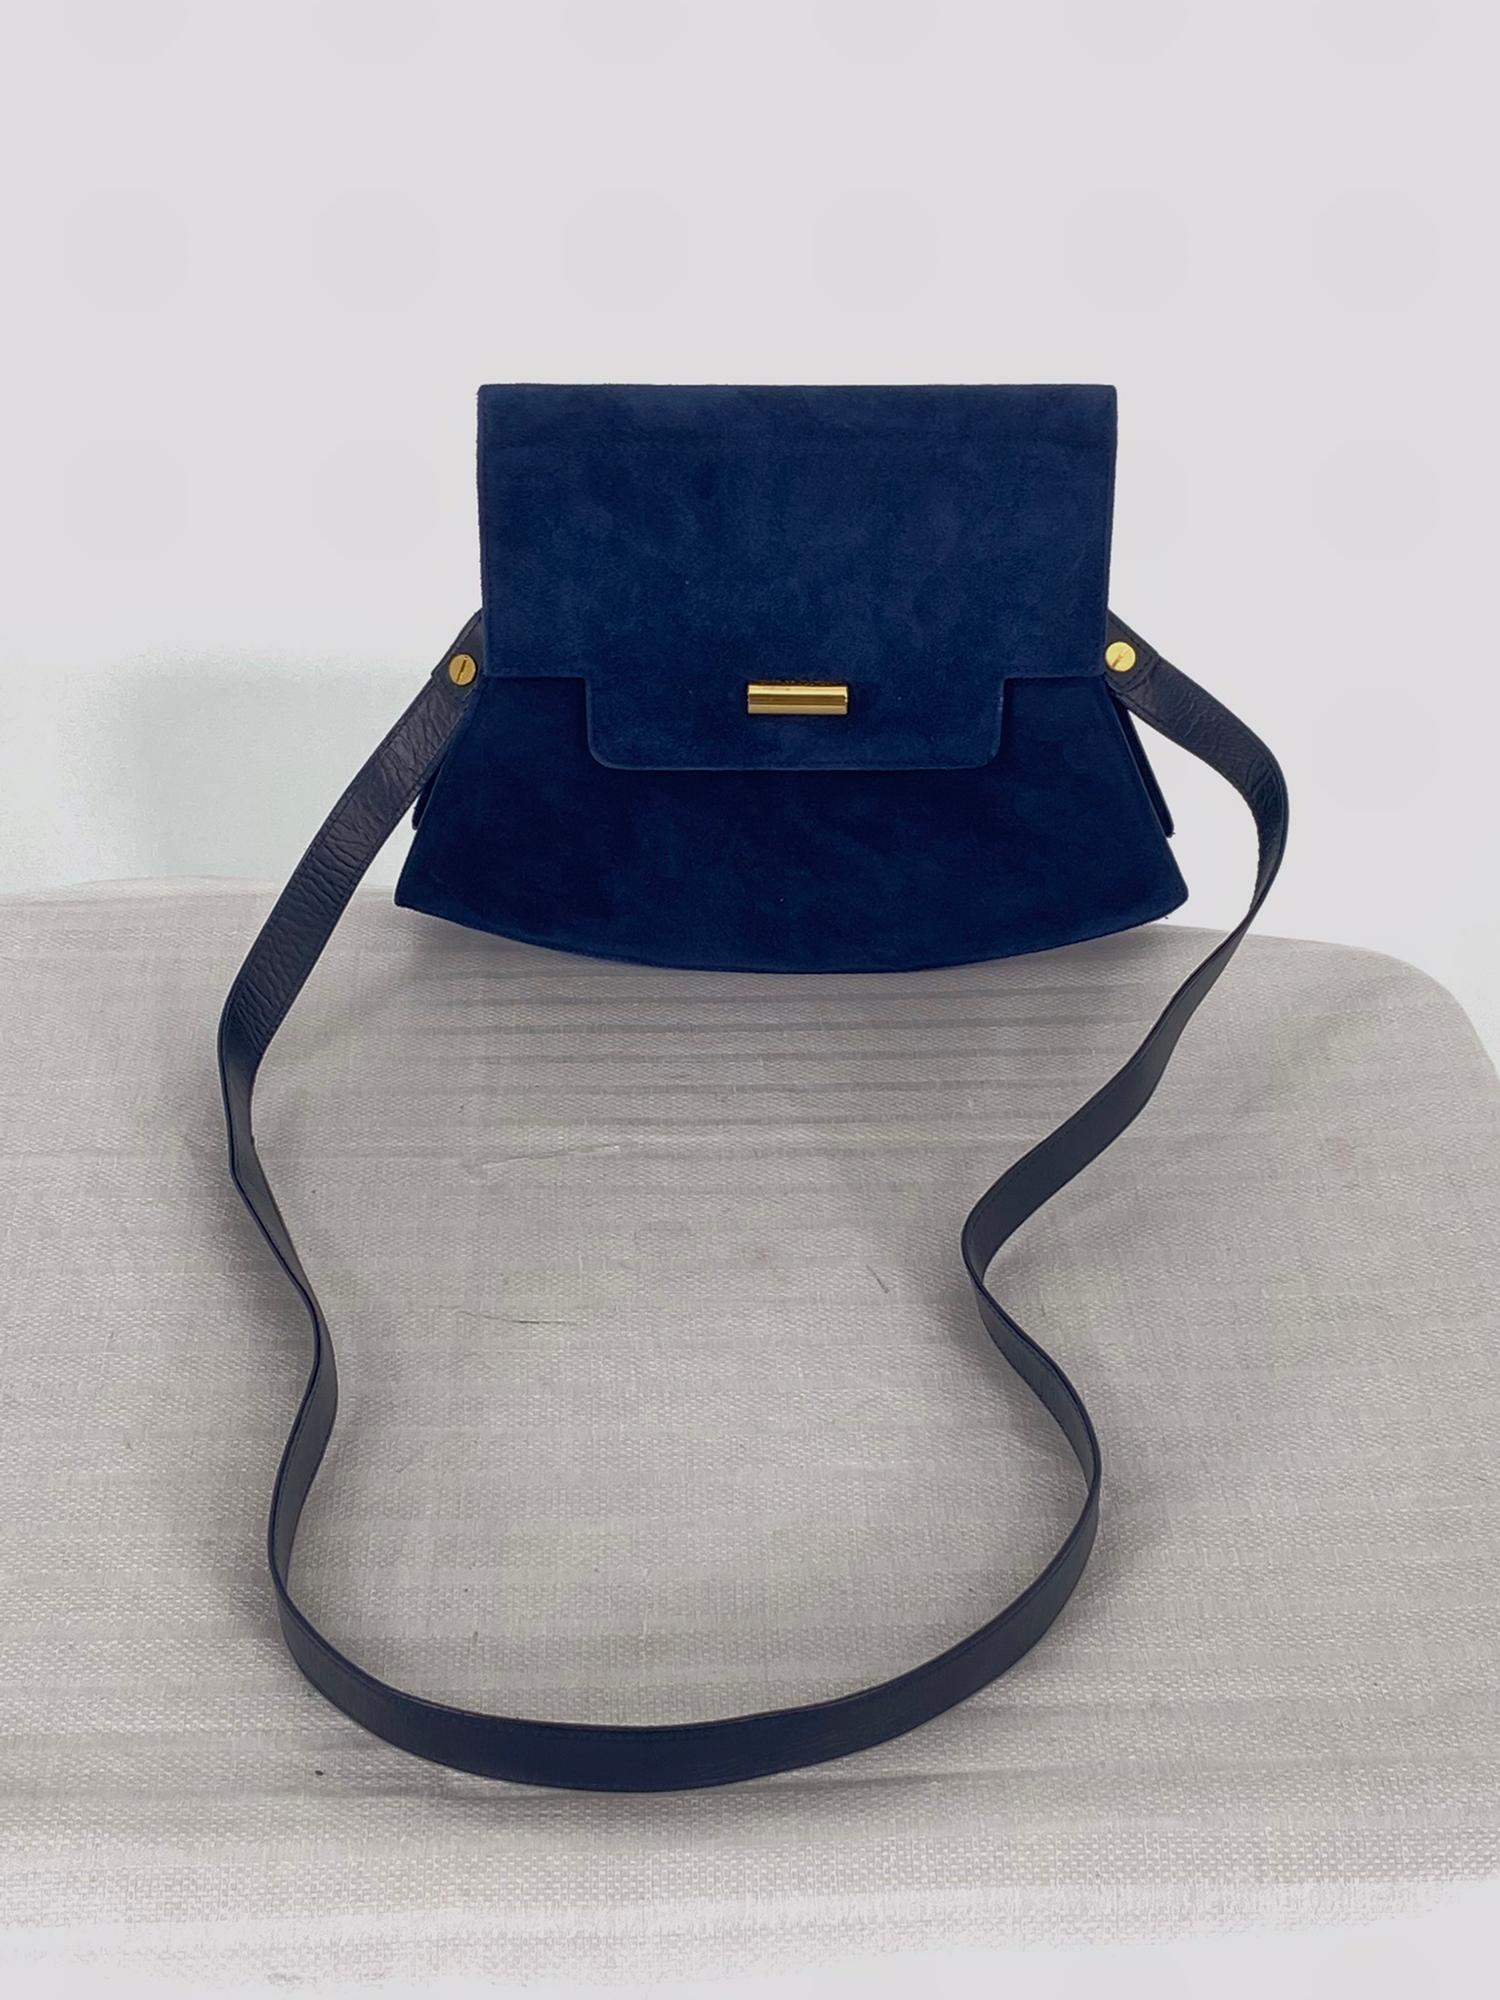 Charles Jourdan Navy Blue Flap Front Suede & Leather Shoulder Bag 1990s In Good Condition For Sale In West Palm Beach, FL